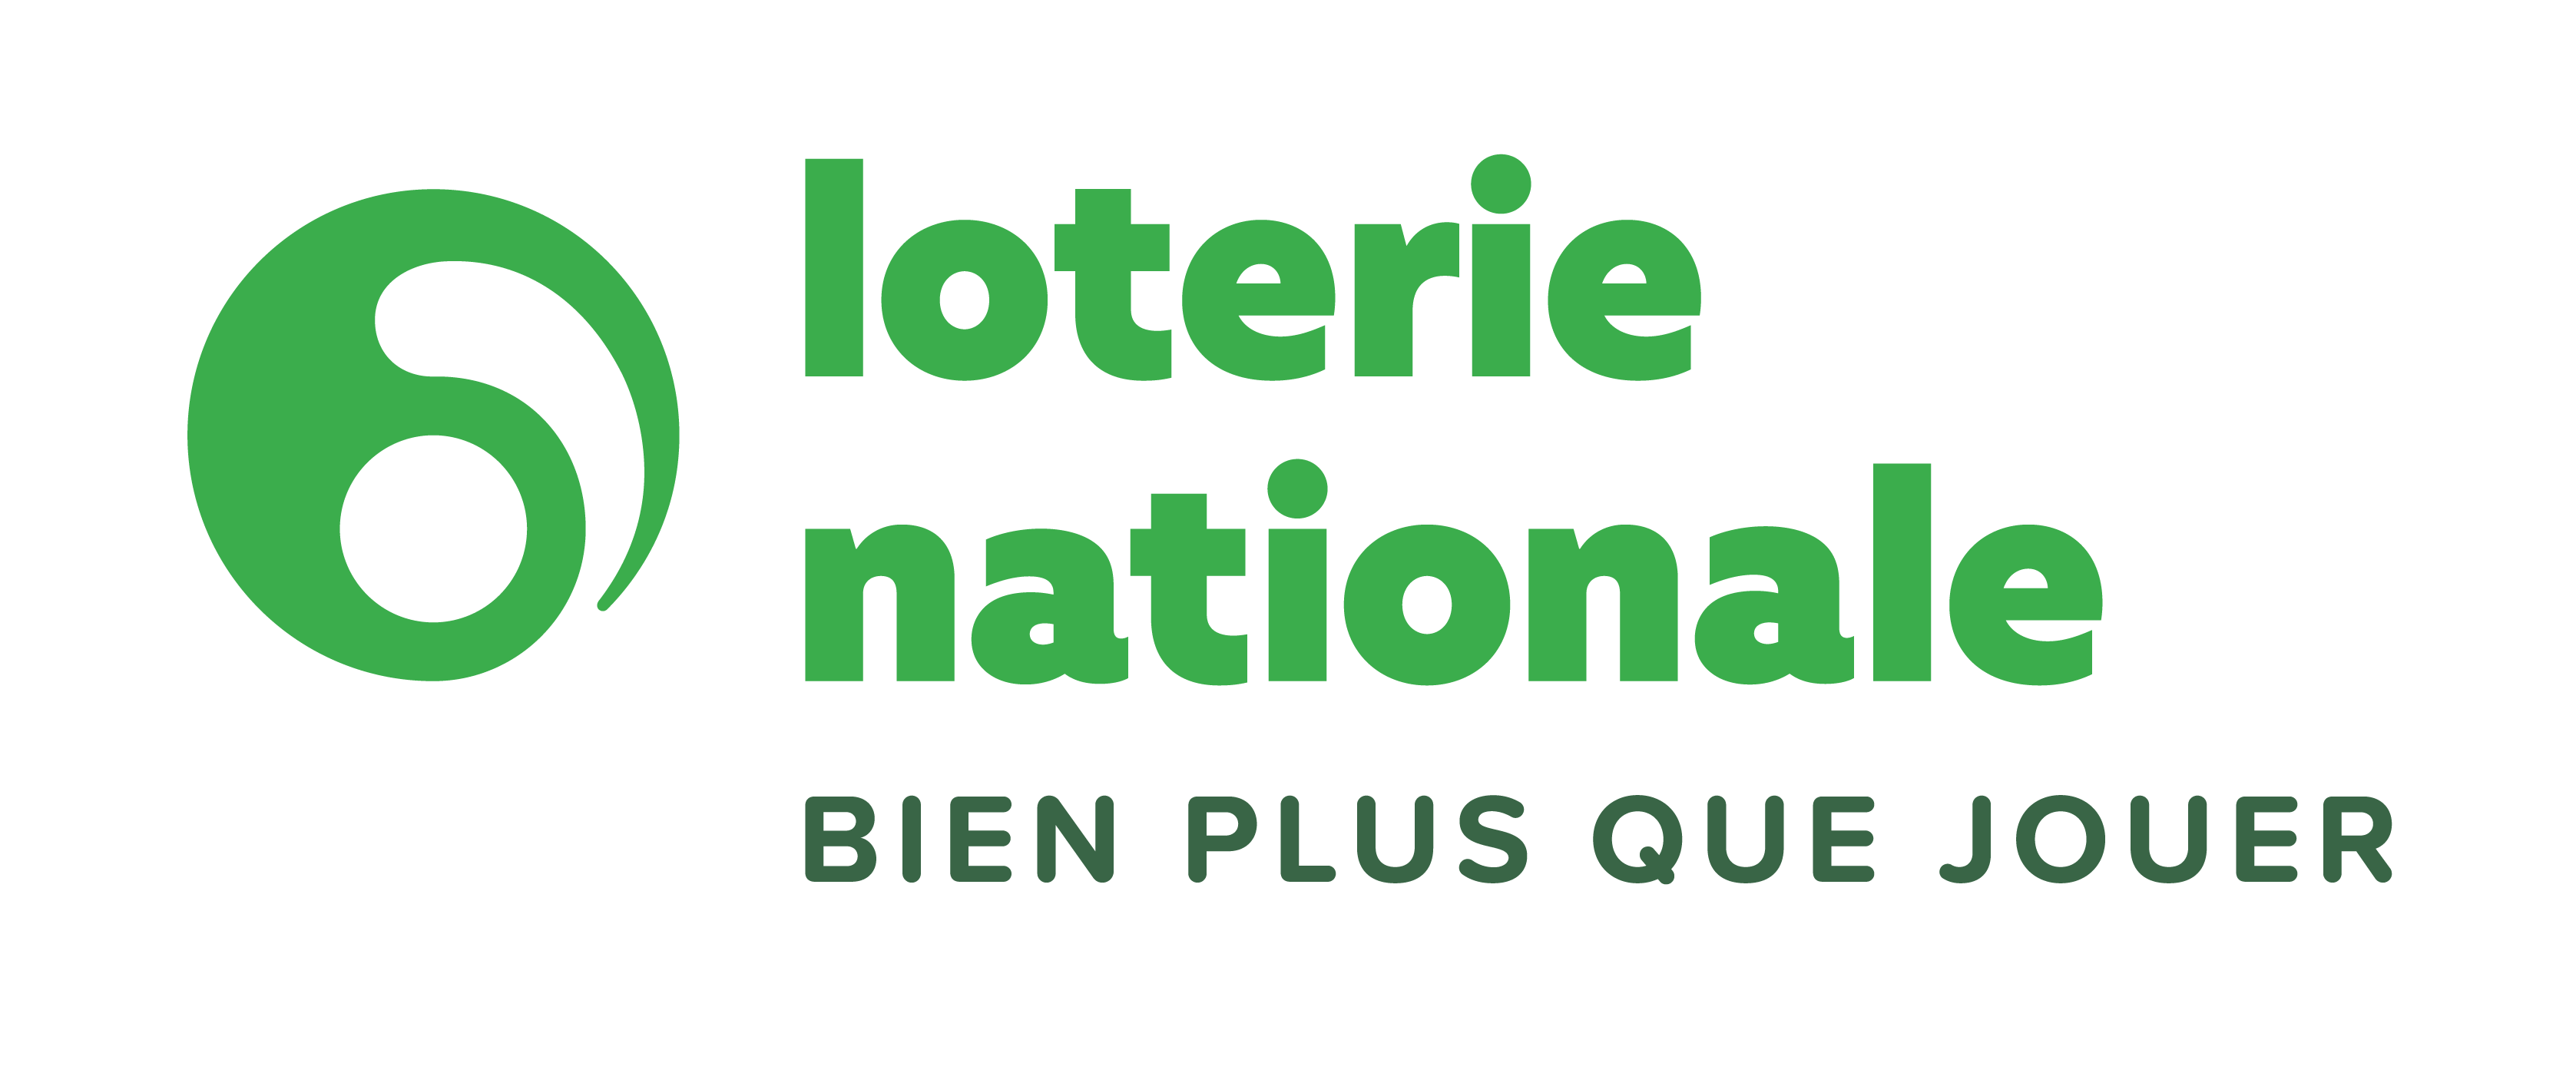 DEL Diffusion Logo Loterie Nationale 300px